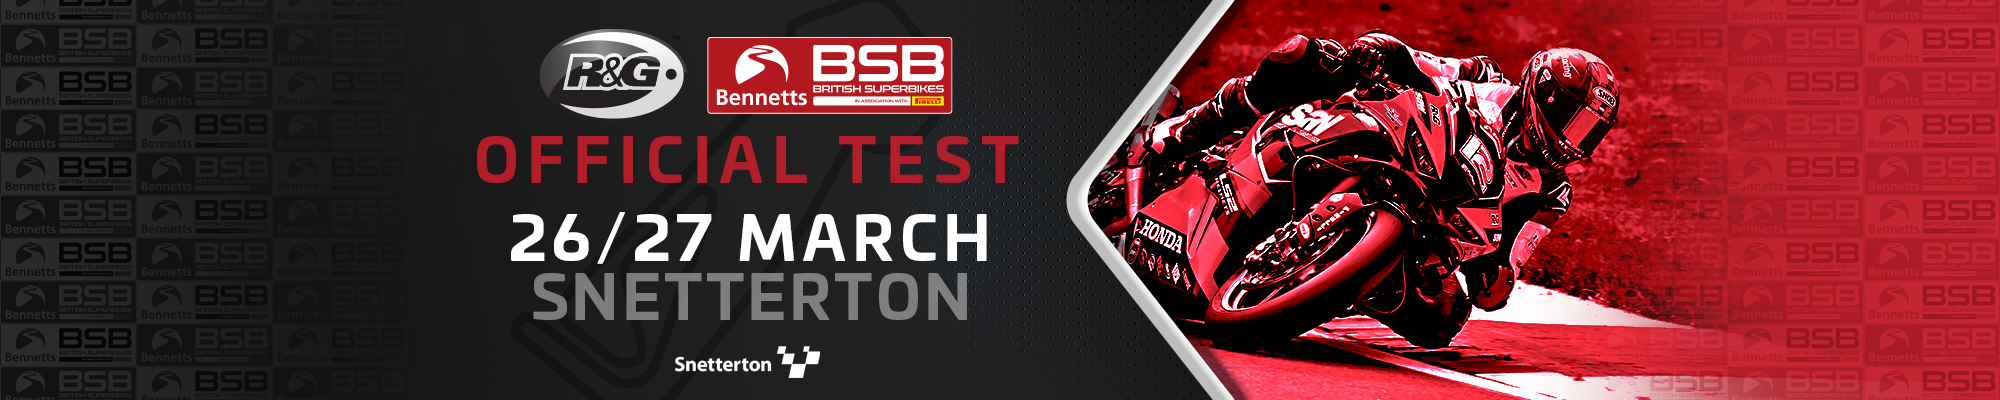 Bennetts British Superbikes – R&G Official Testing